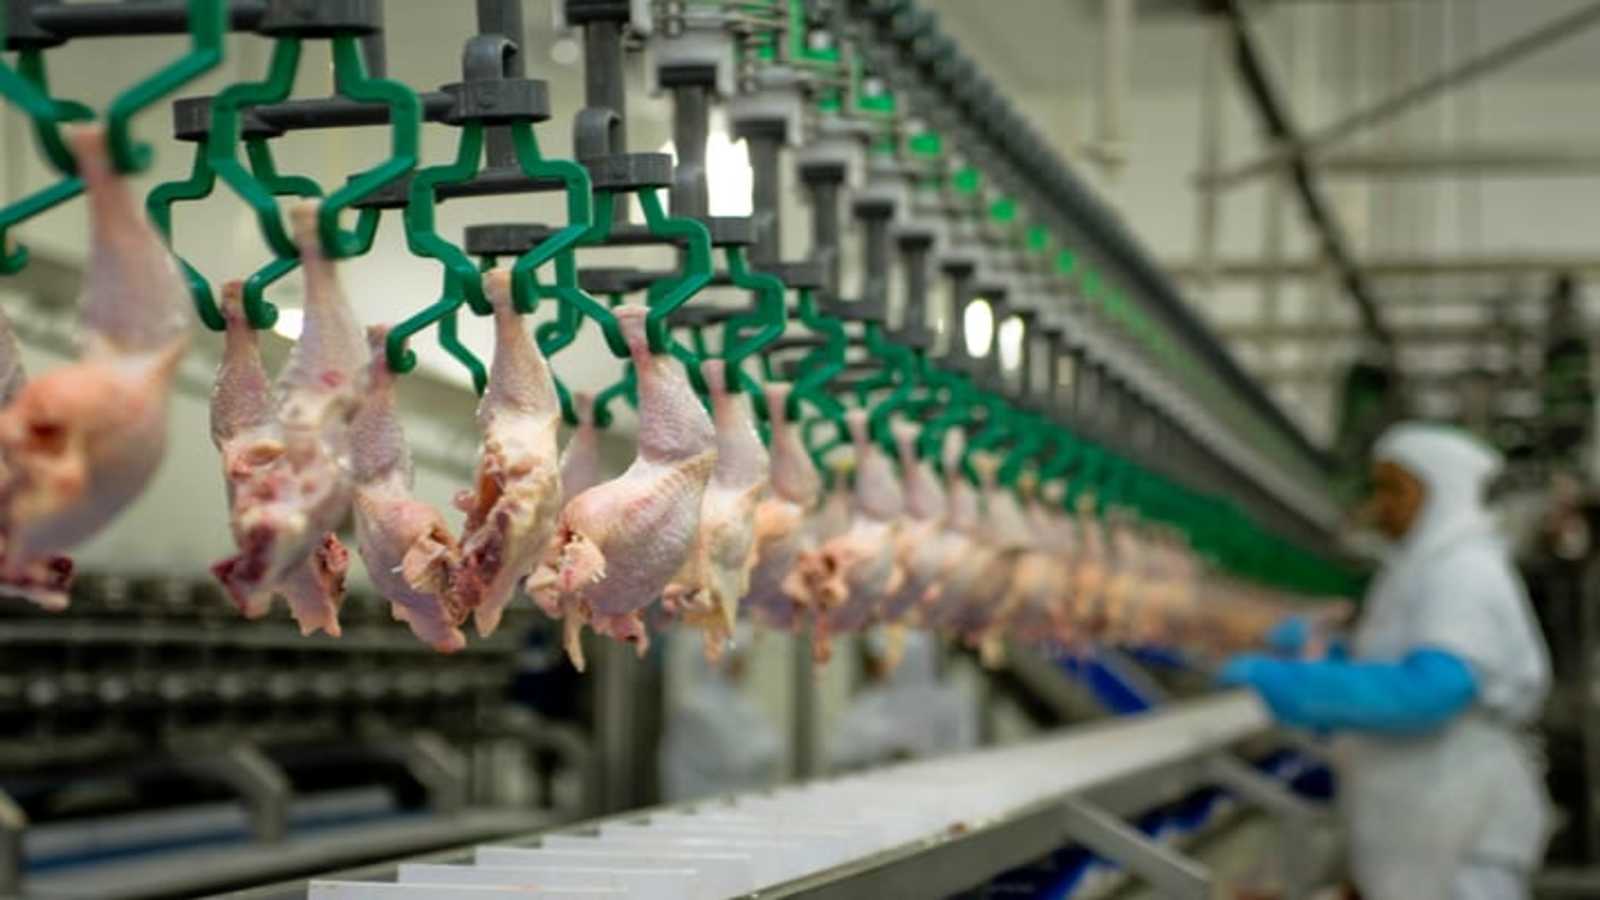 US revokes rule to permanently increase poultry slaughtering speeds